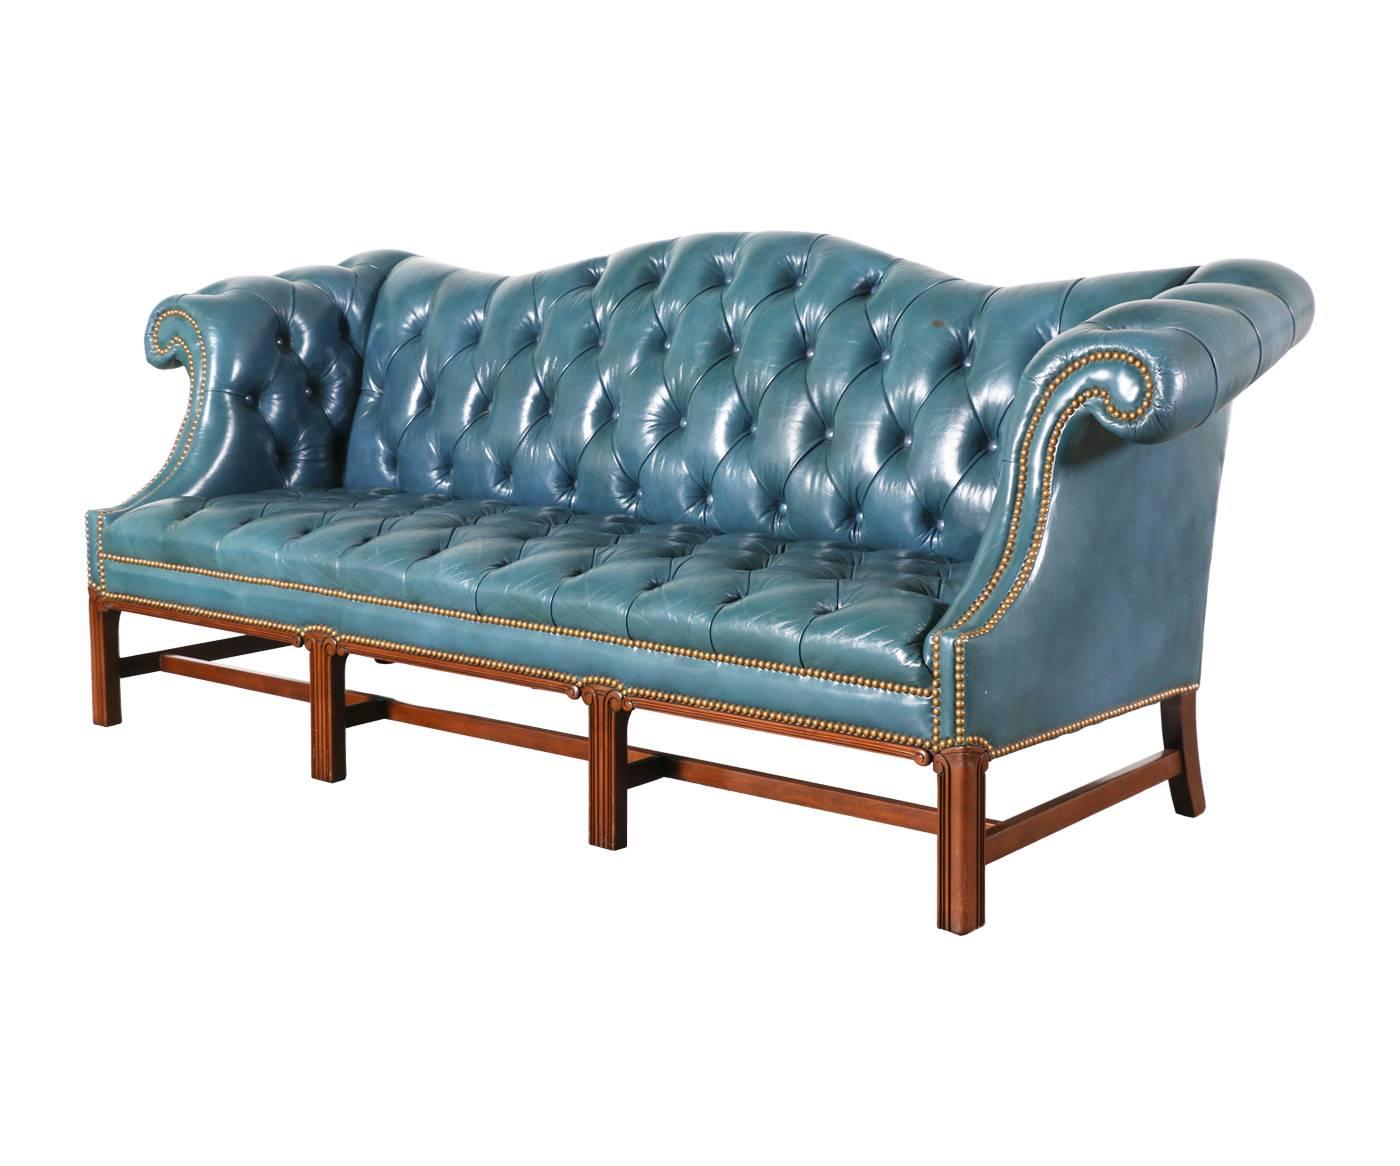 Designer: Unknown.
Manufacturer: Unknown.
Period/style: Chesterfield.
Country: England.
Date: 1960s.

Dimensions: 33.5″ H x 81″ L x 30.5″ W.
Seat height 16″.
Materials: Original leather shows beautiful patina.
Condition: Shows minor wear